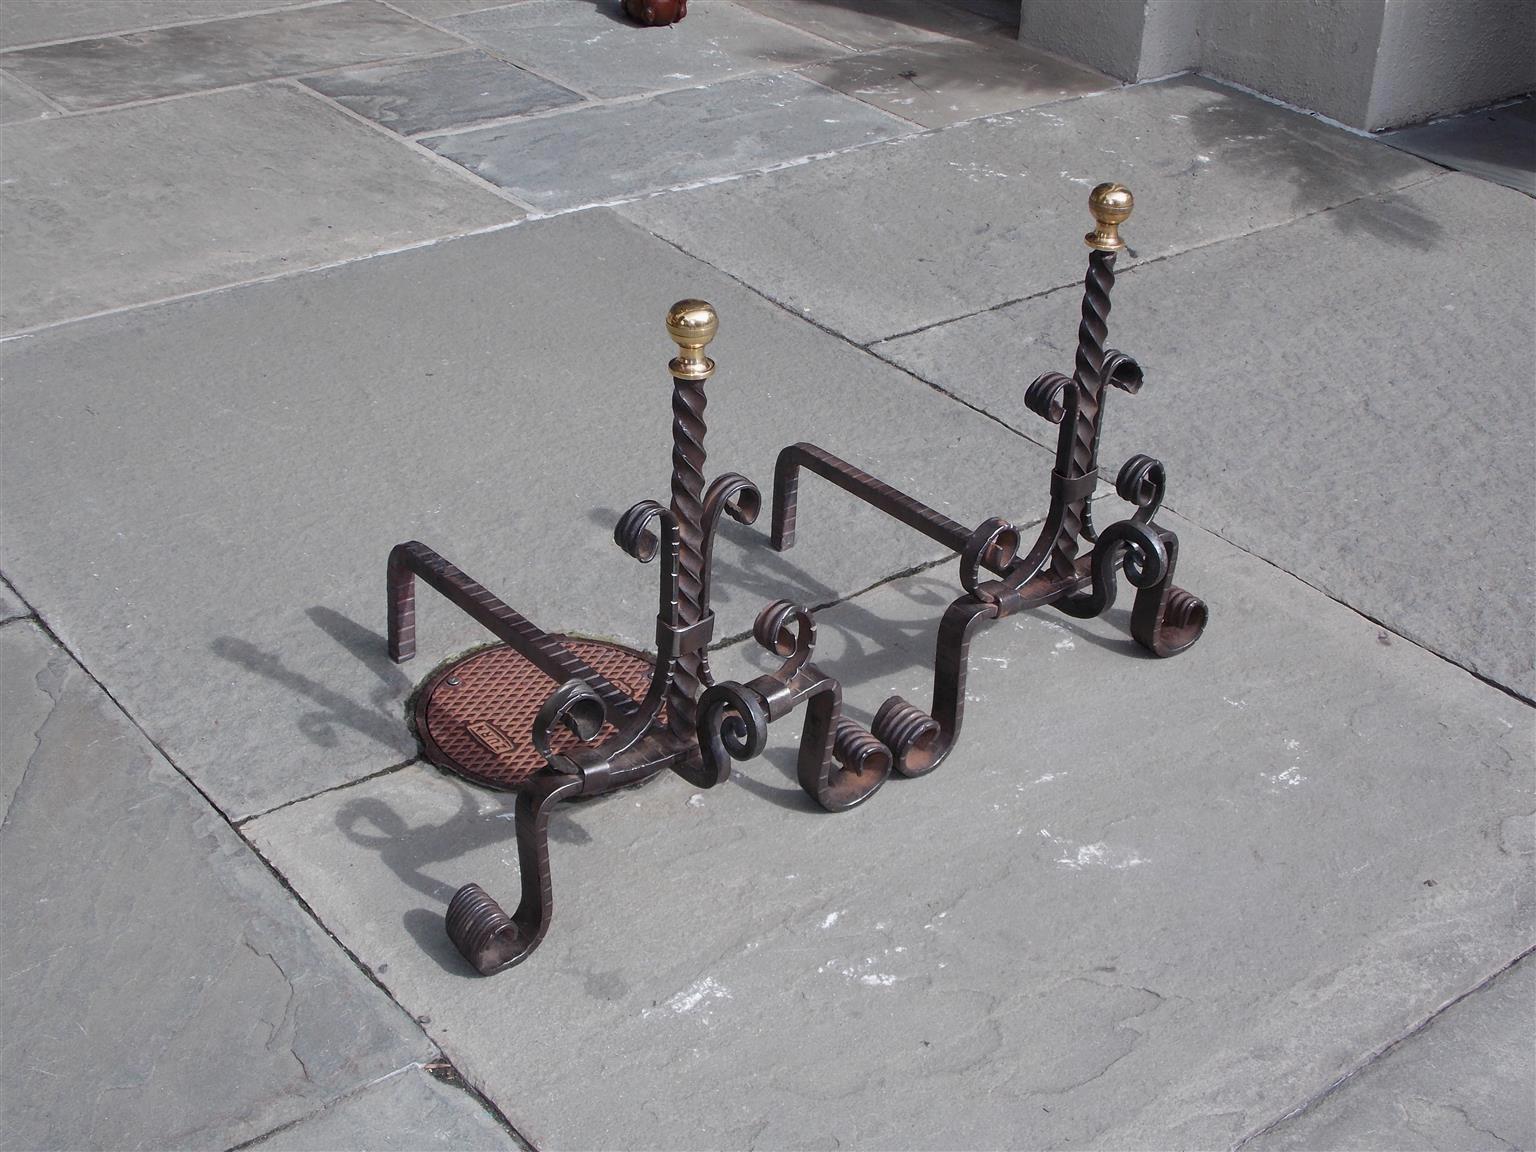 Pair of American wrought iron and brass ball top diminutive andirons with centered spiral columns, scrolled plinths with spit hooks, original chased dog legs, and resting on decorative scrolled chased feet, Mid-19th century.